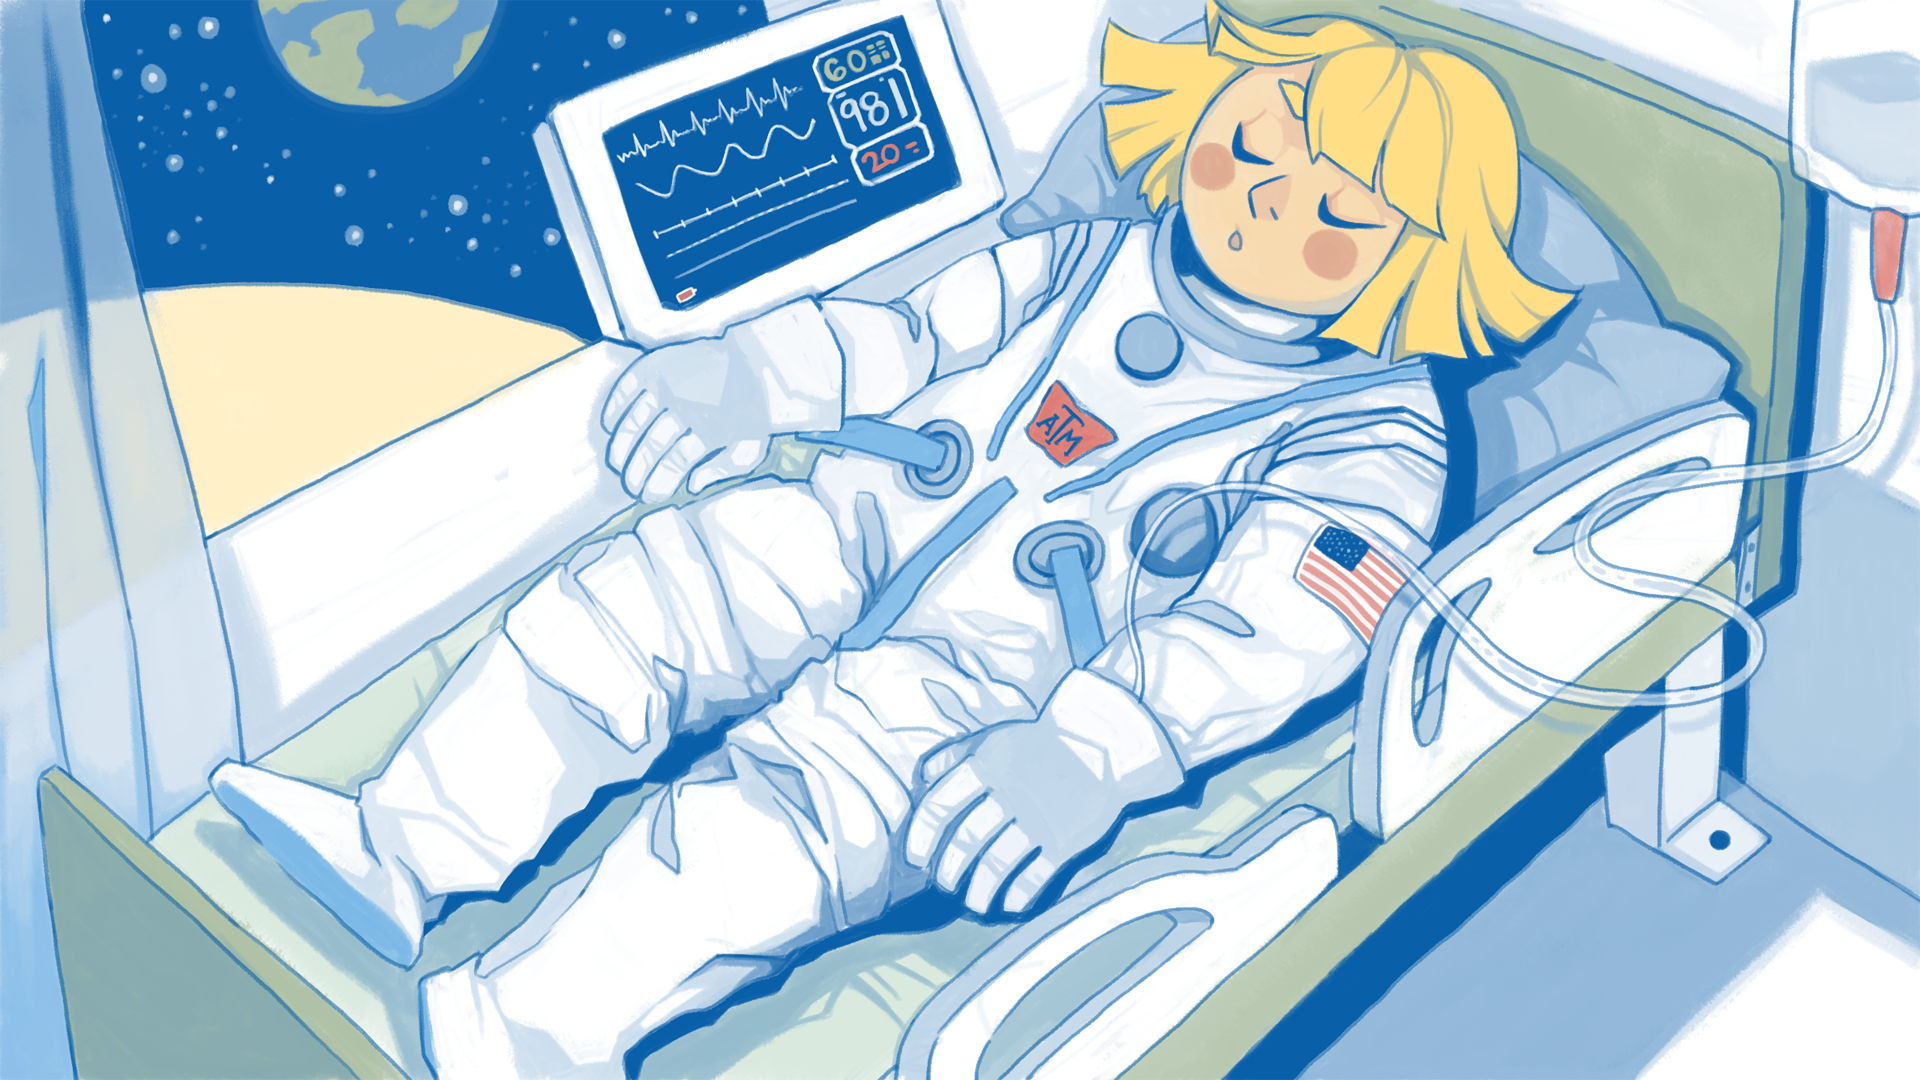 Space travel: What are its effects on long-term health of astronauts? ←